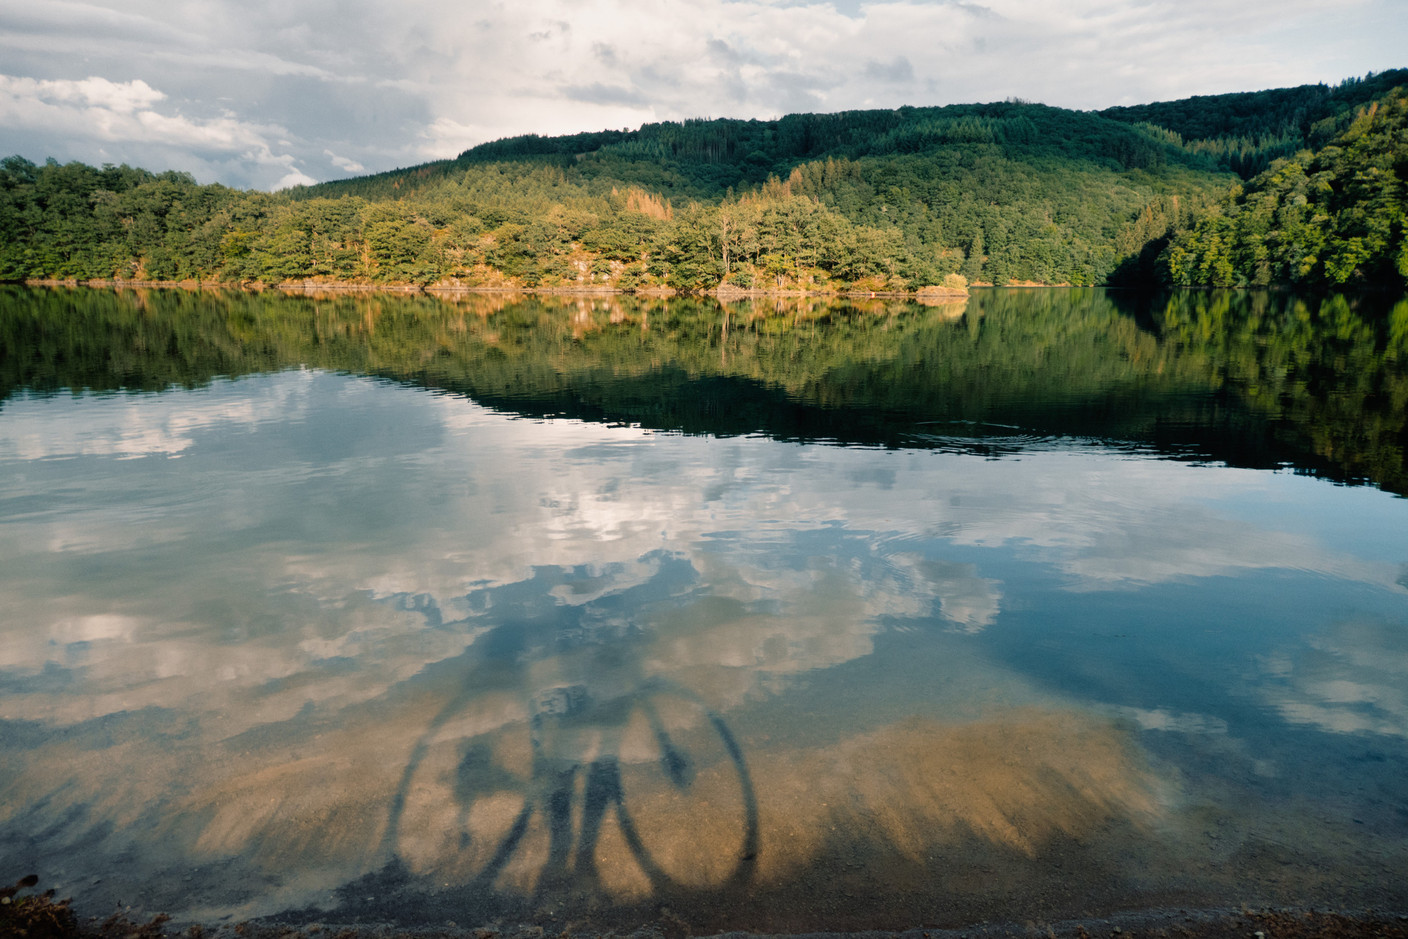  A cyclist’s silhouette is cast on the water’s surface kewl.lu